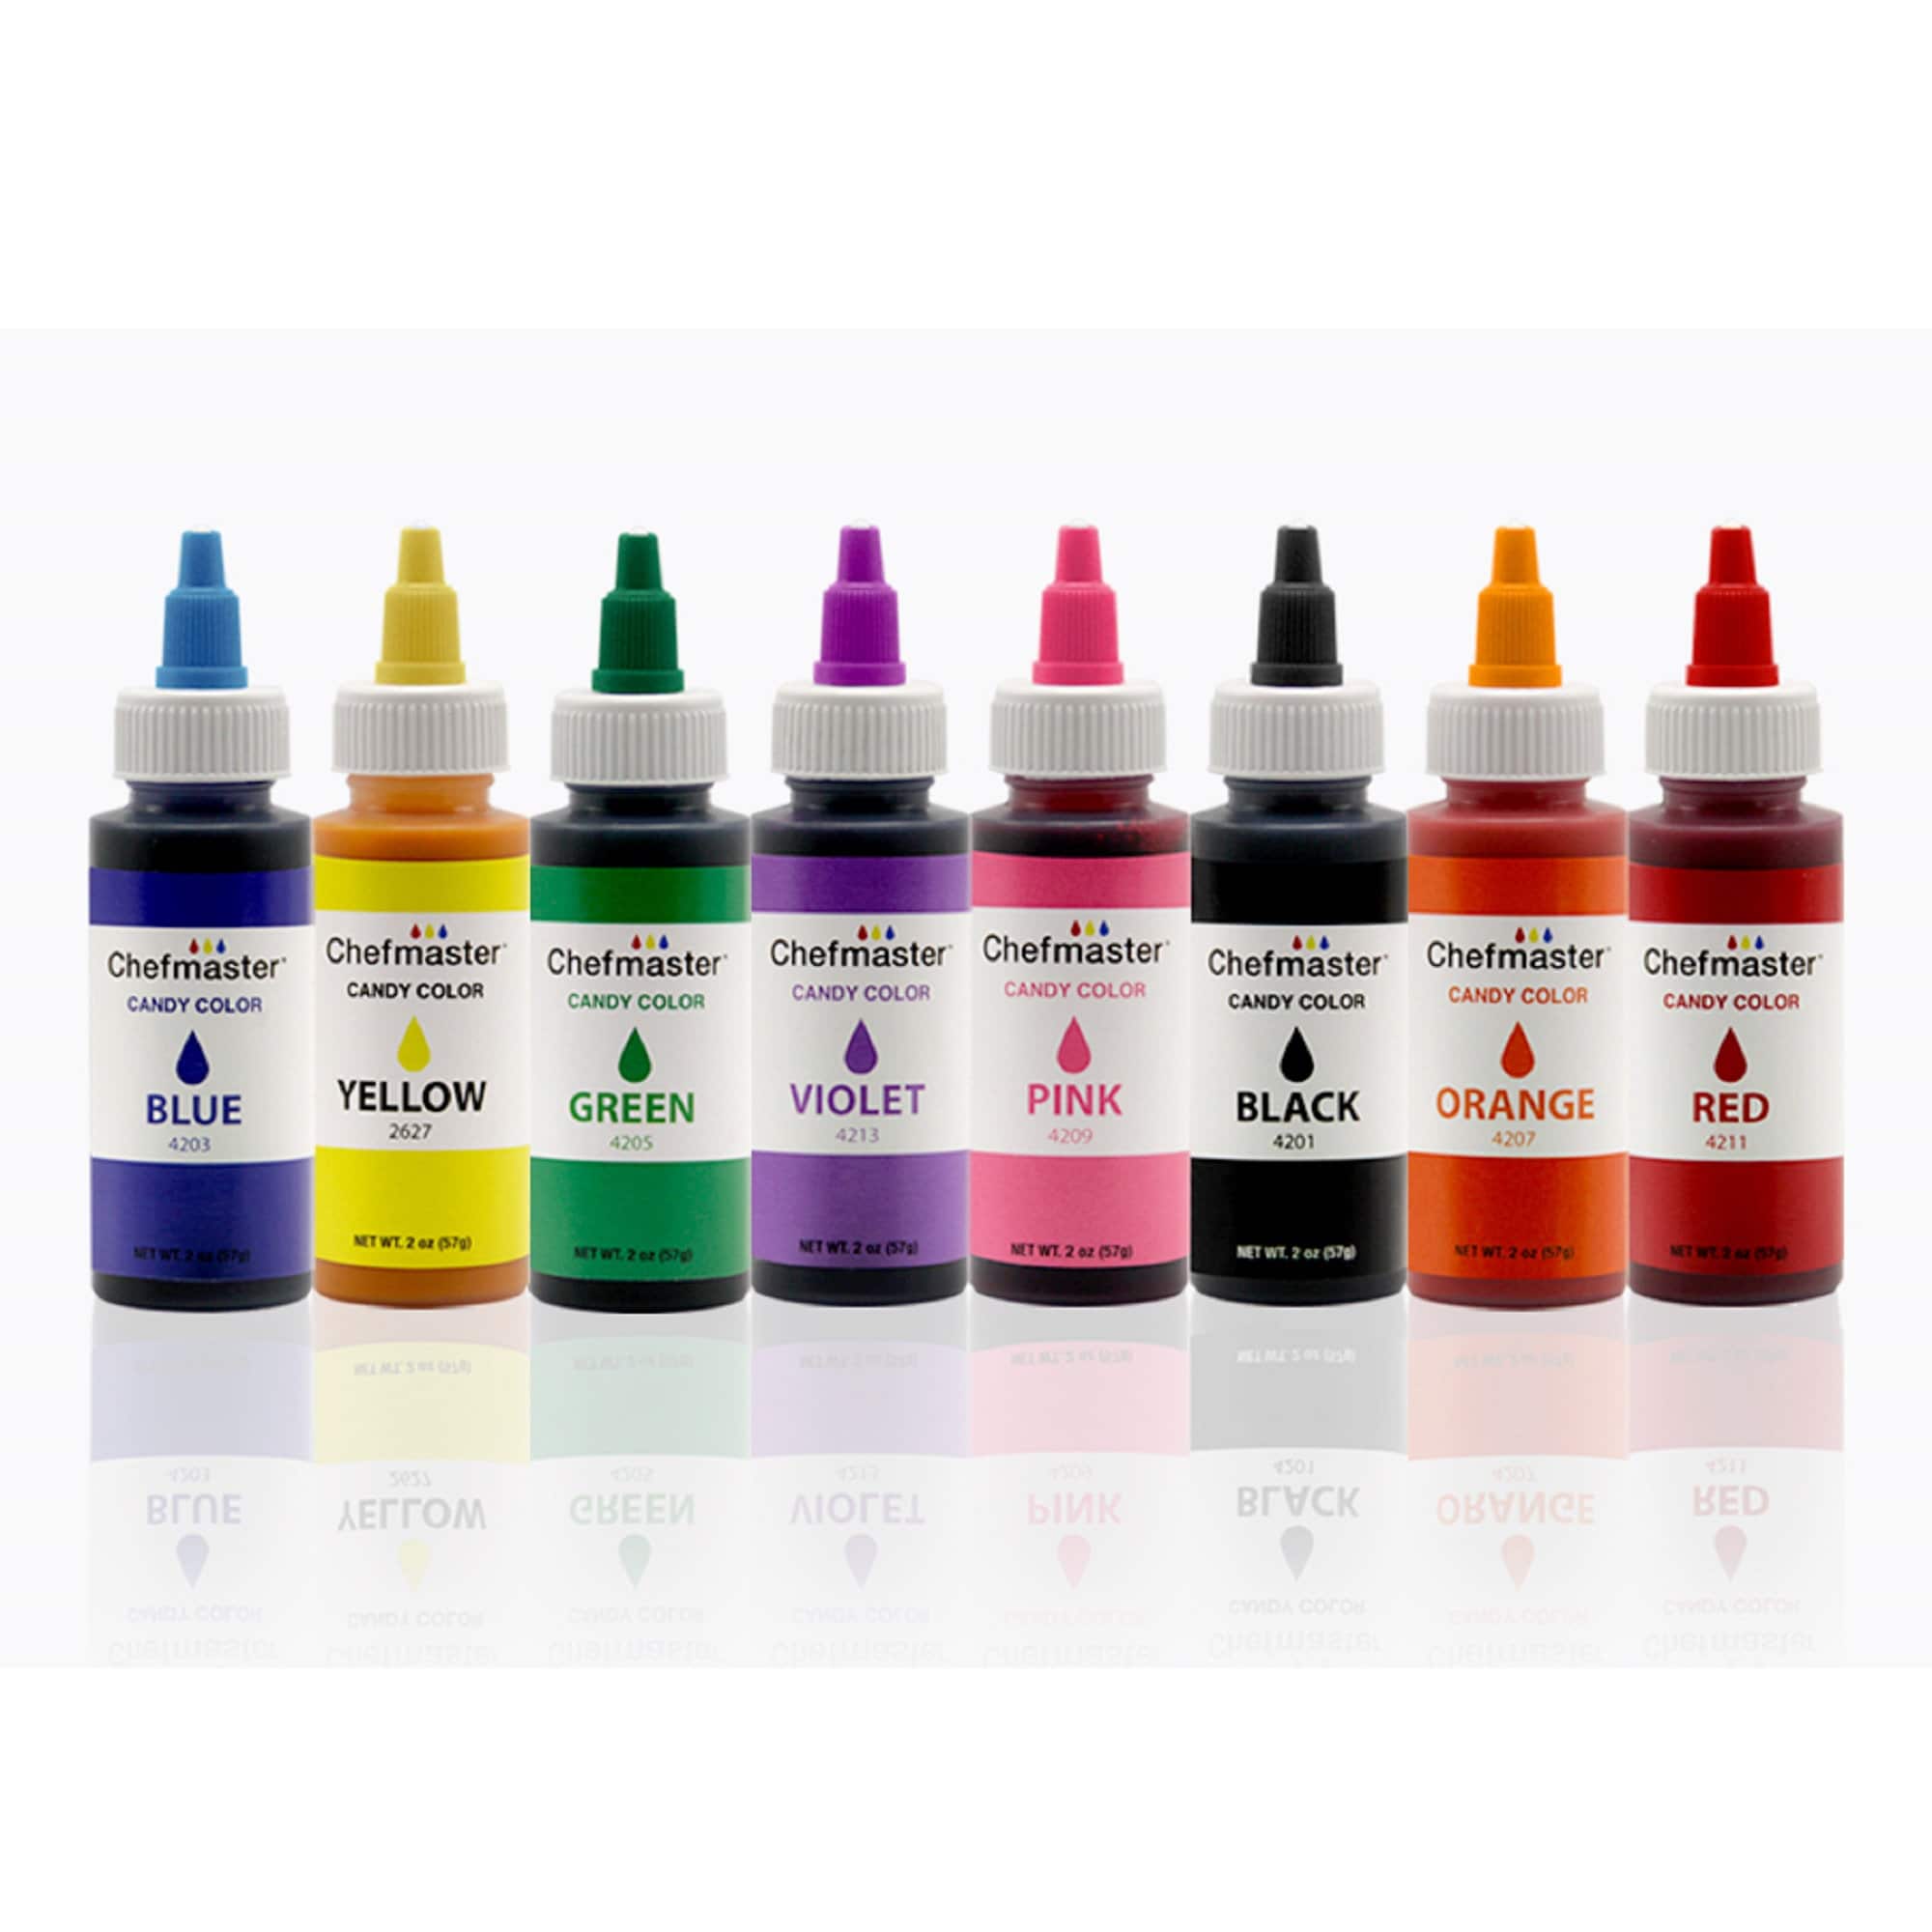 Colour Mill Oil-Based Food Coloring, 100 Milliliters Black